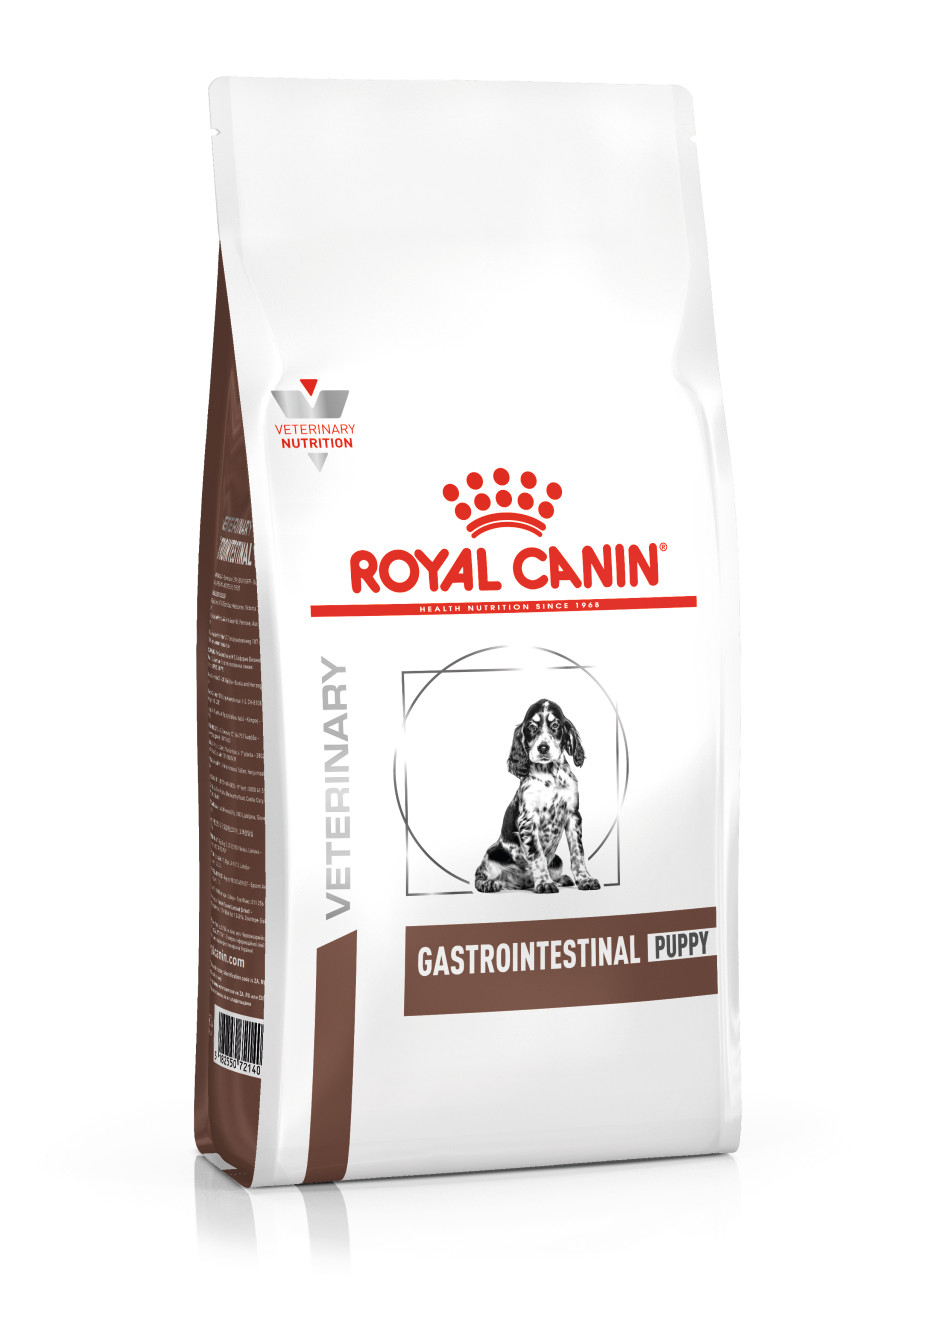 Royal Canin Veterinary Gastrointestinal Puppy pour chiot